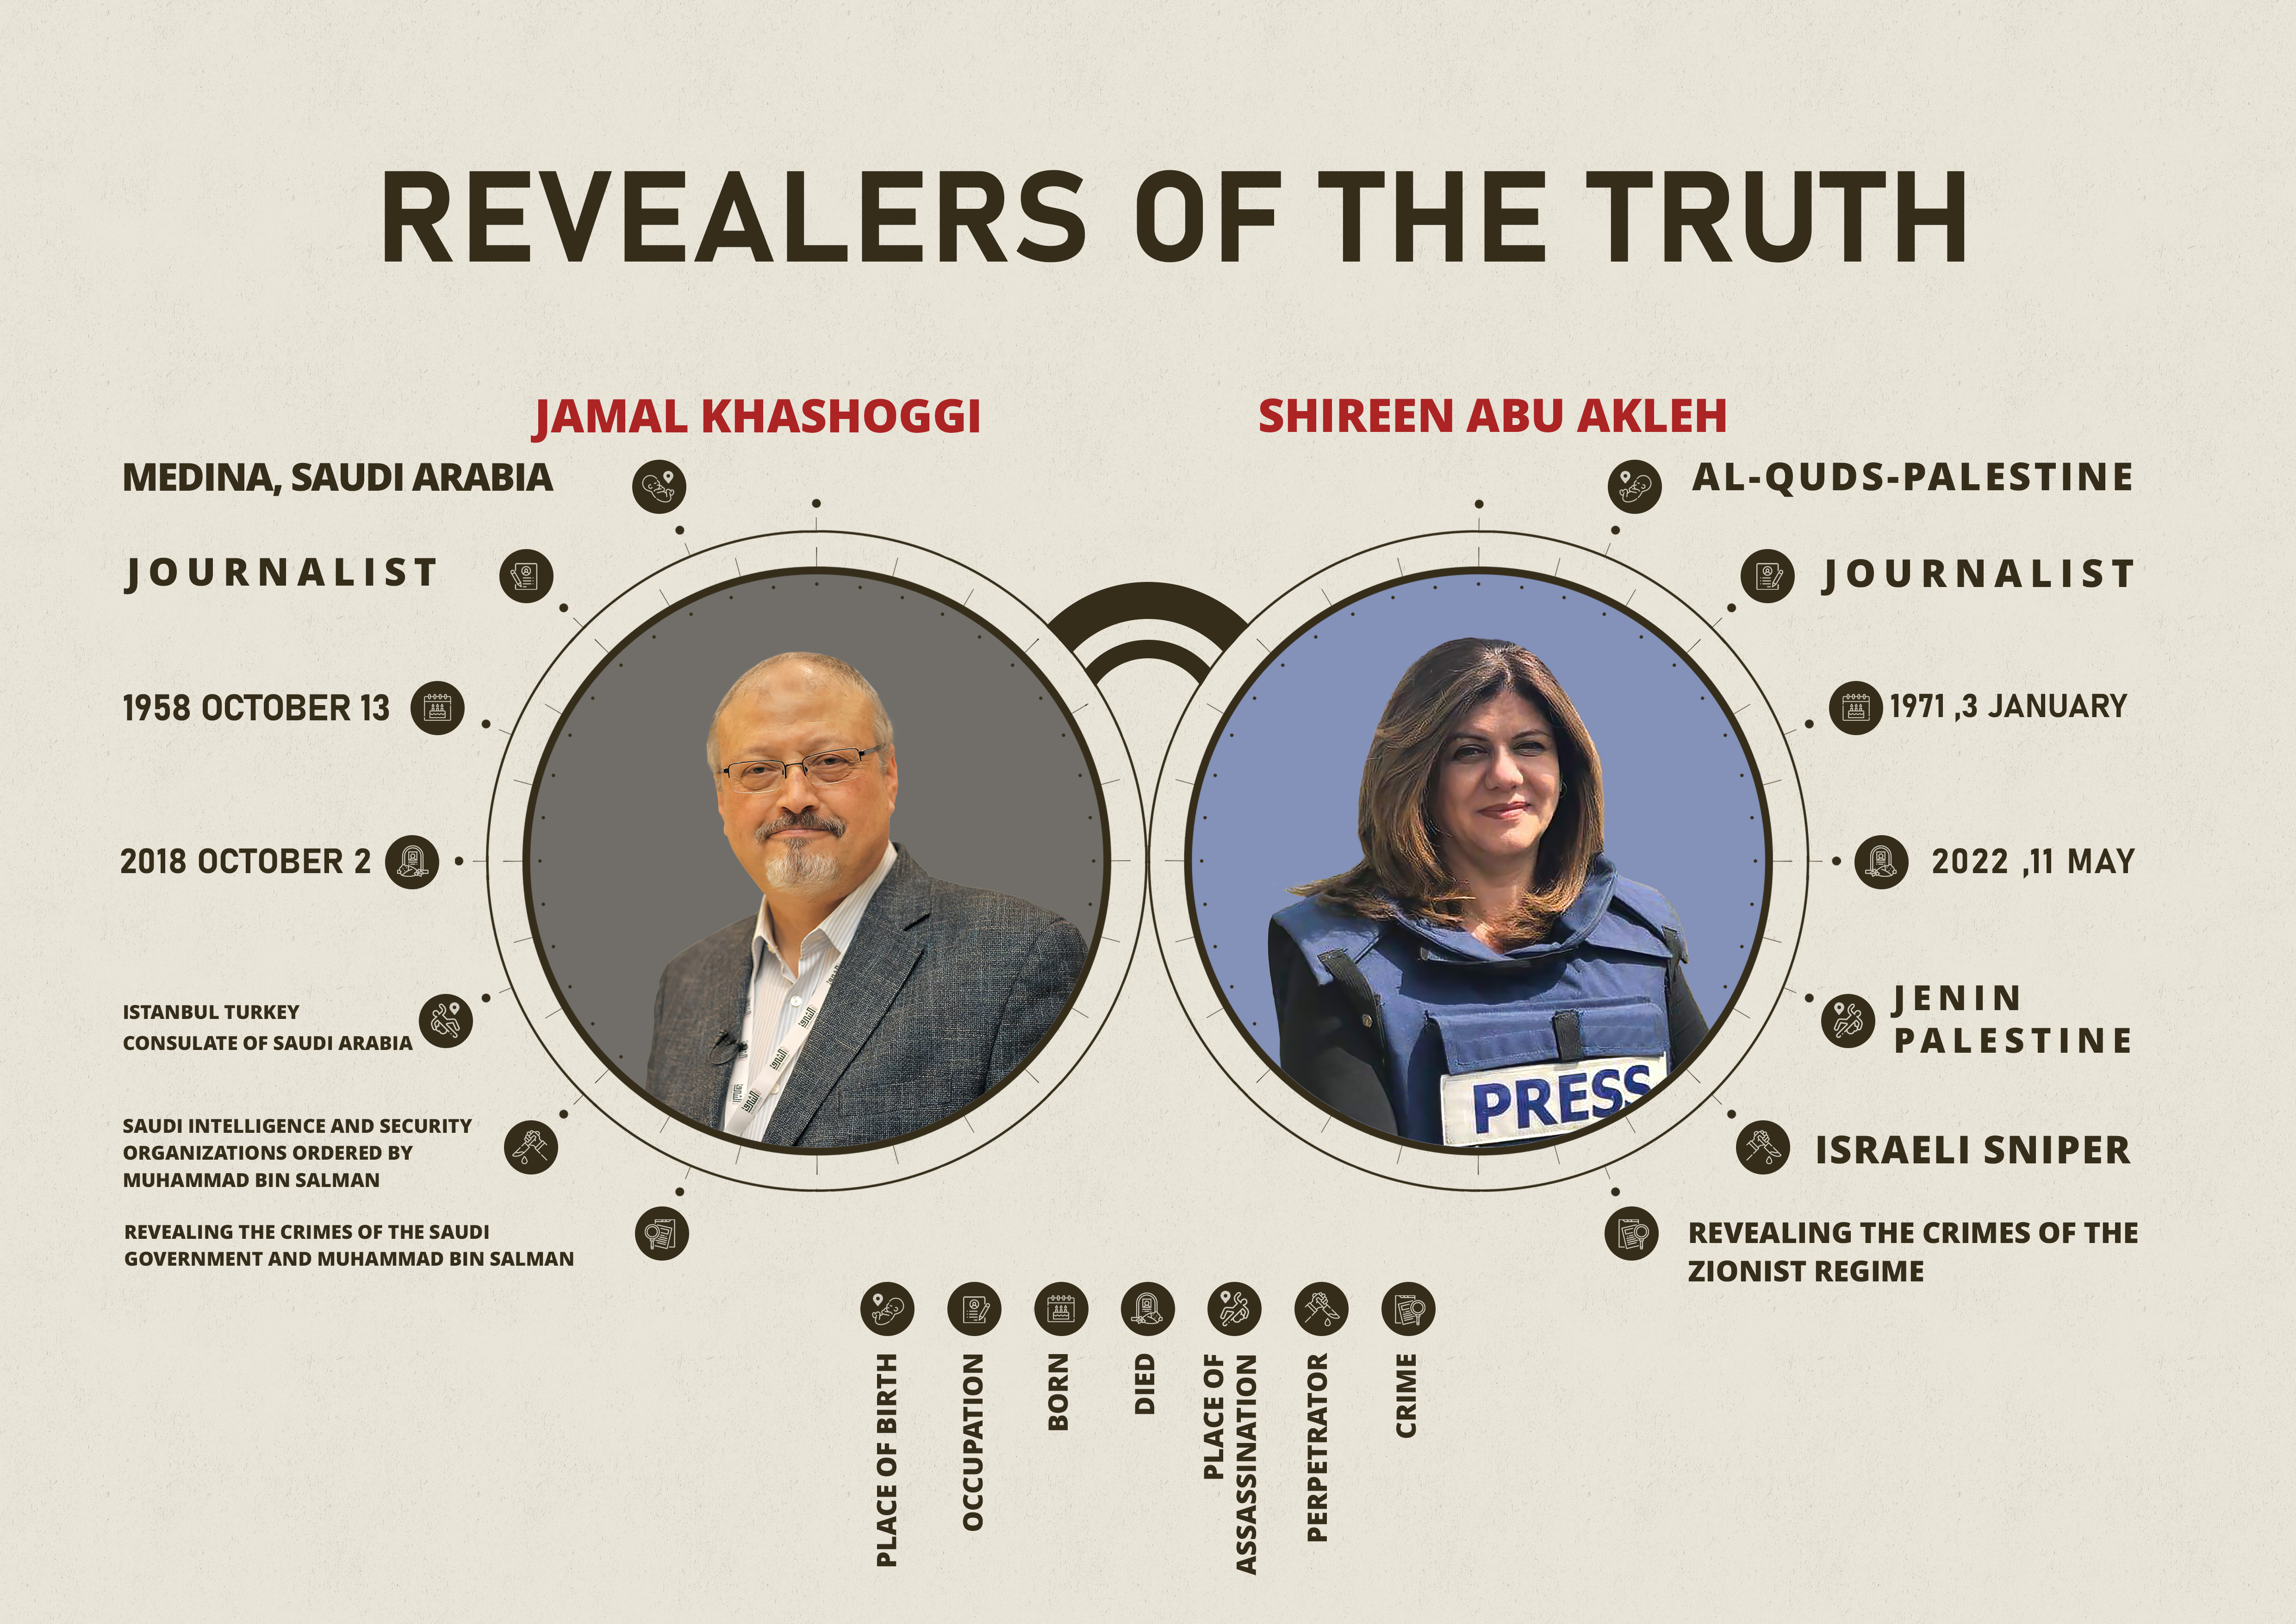 Revealers of the truth